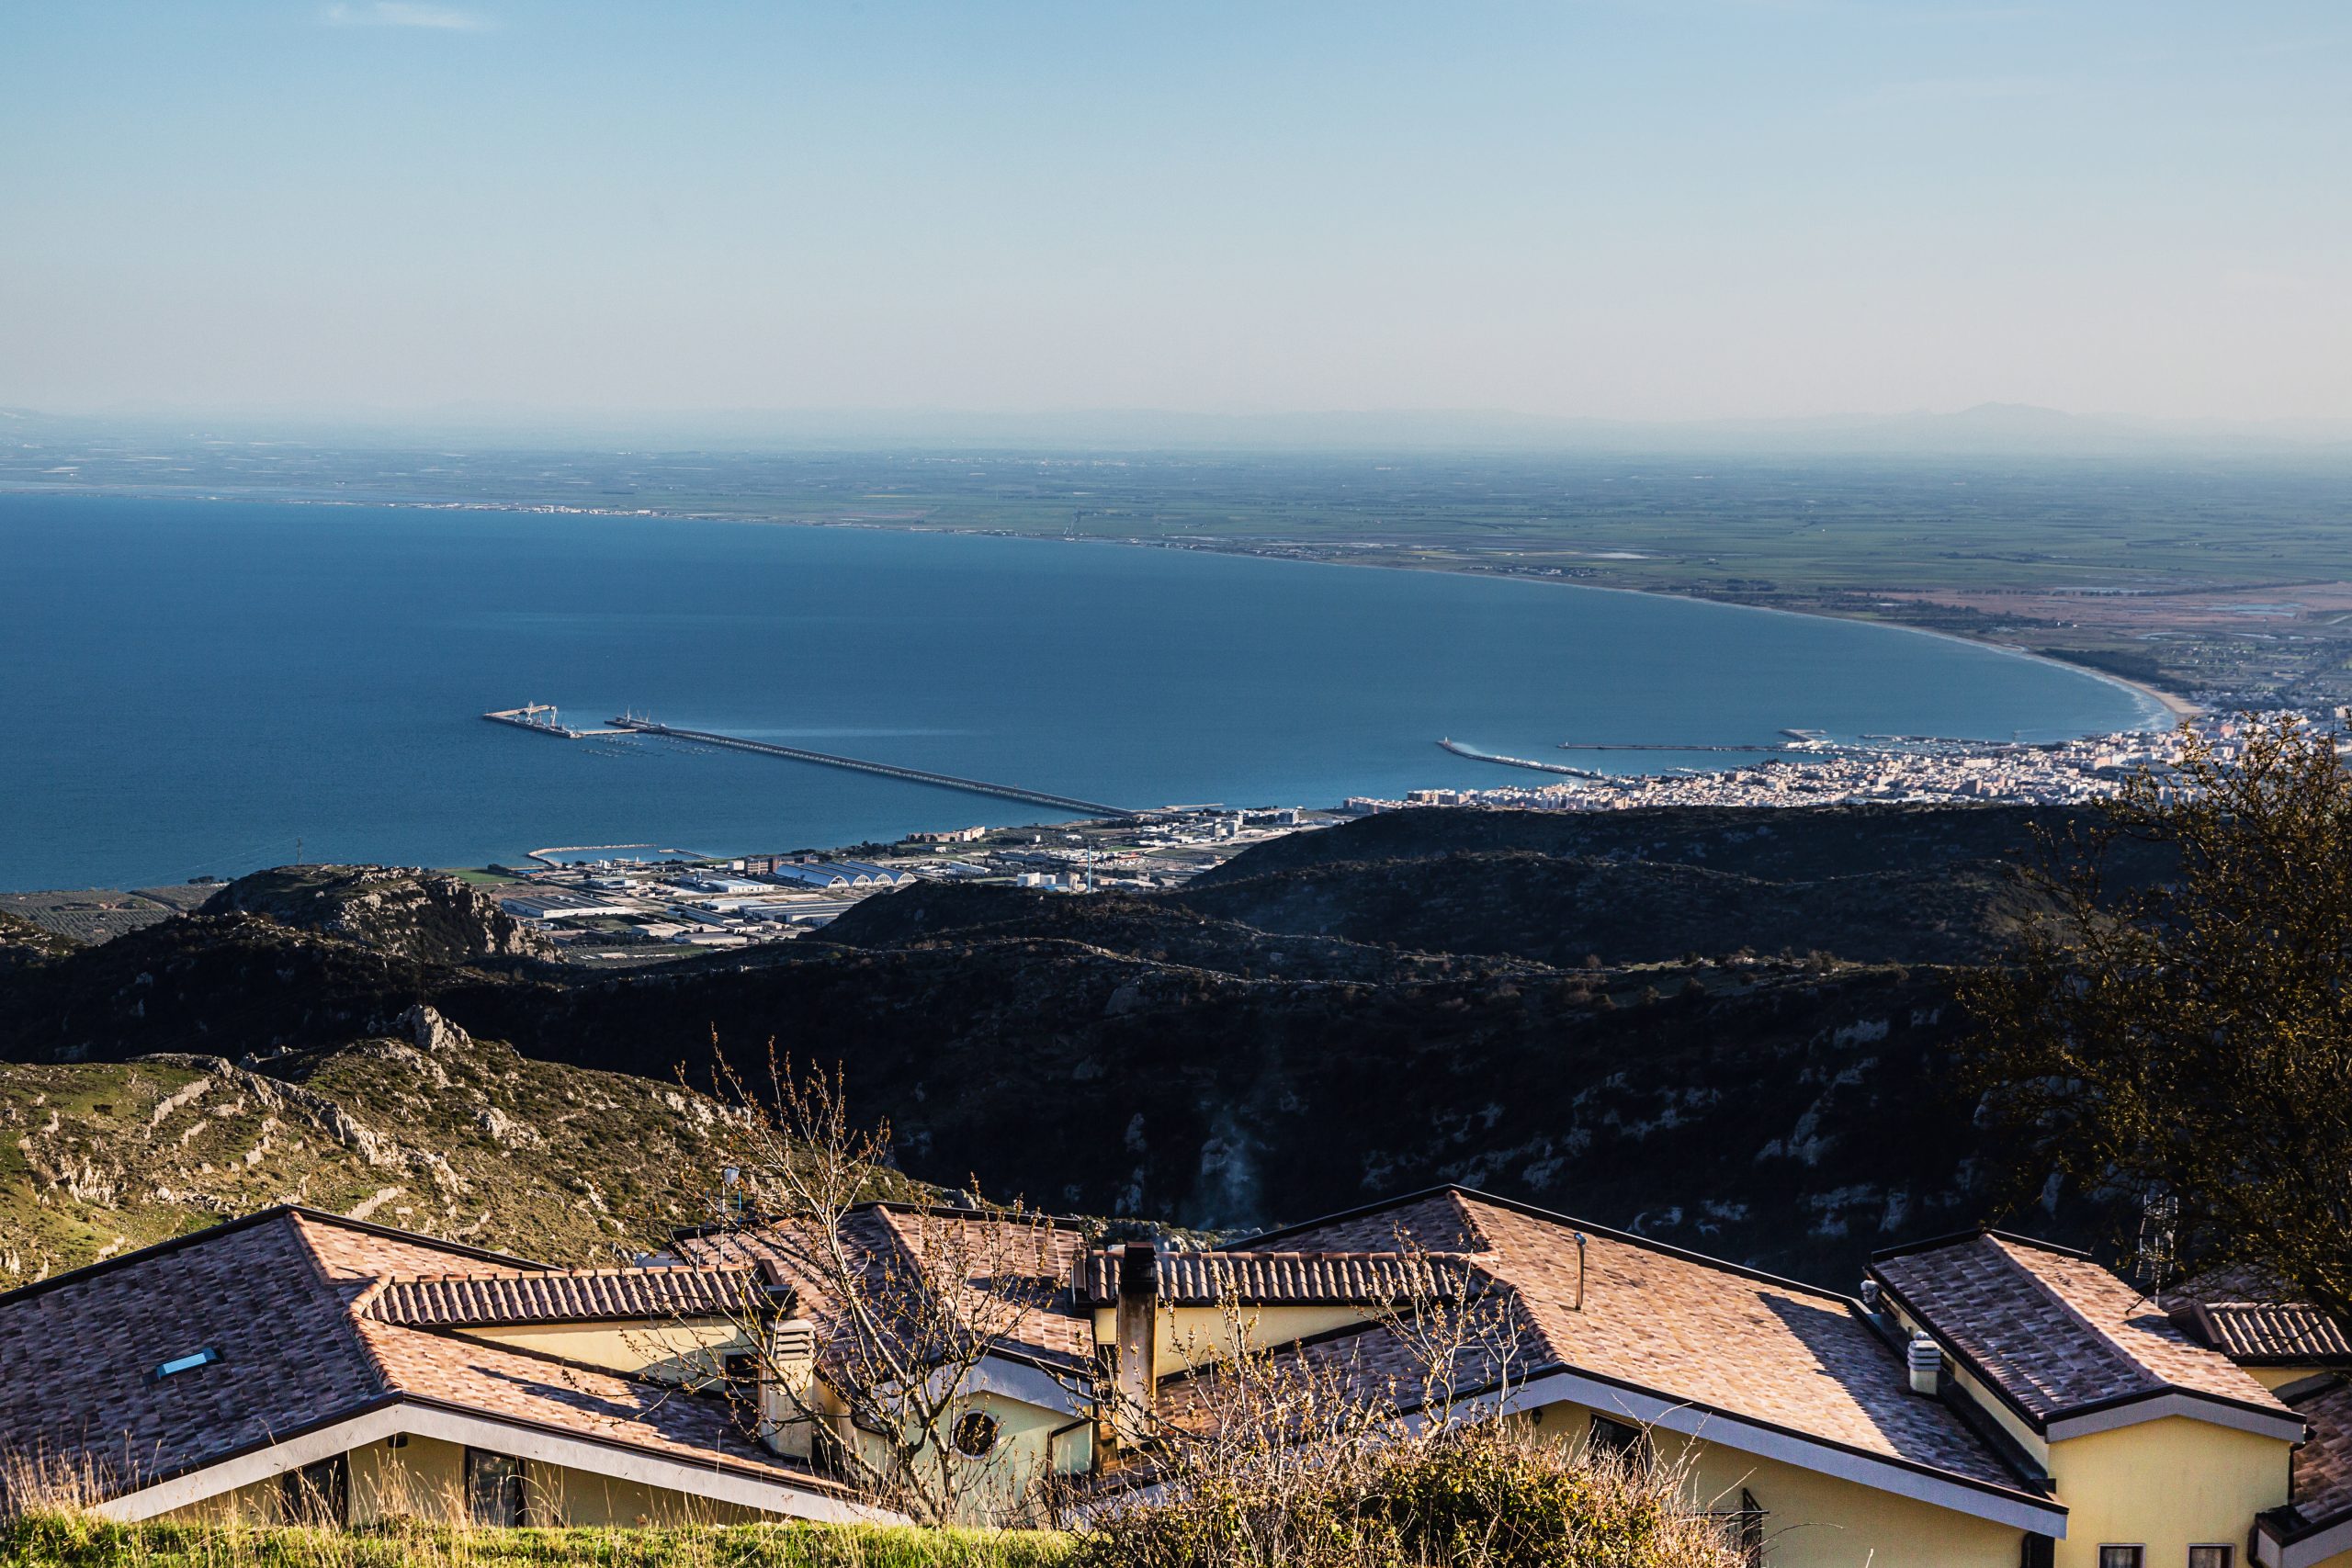 The Gulf of Manfredonia seen from Monte Sant’Angelo. Jurisdiction over the industrial area next to Manfredonia belongs to the town, located almost 17 kilometres away.